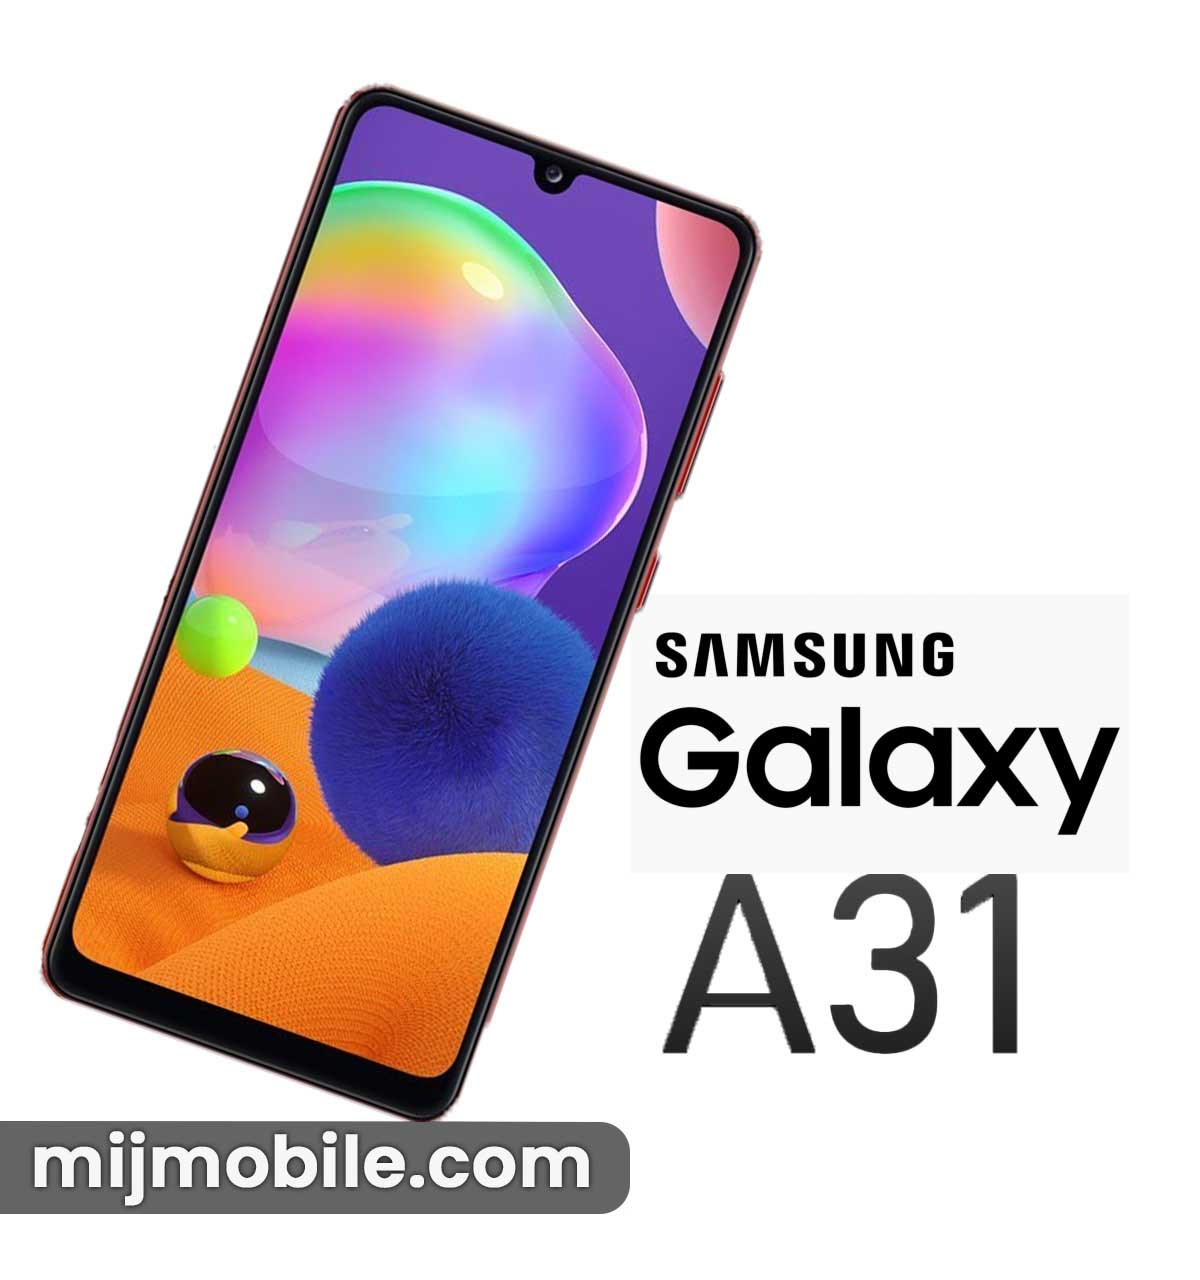 Samsung Galaxy A31 Price in Pakistan & Specifications